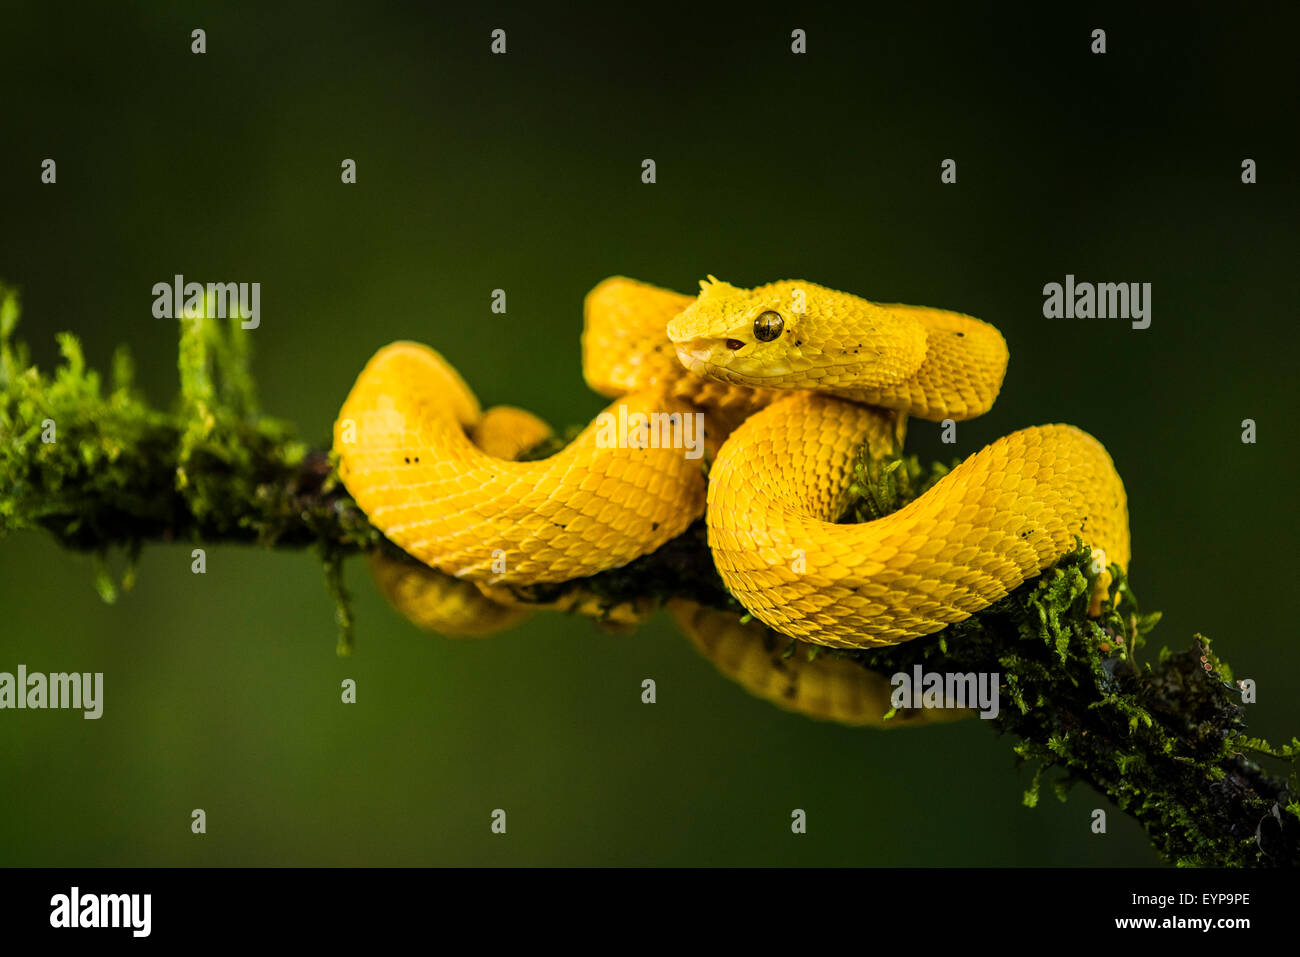 An Eyelash Pit Viper in a Costa Rica forest Stock Photo